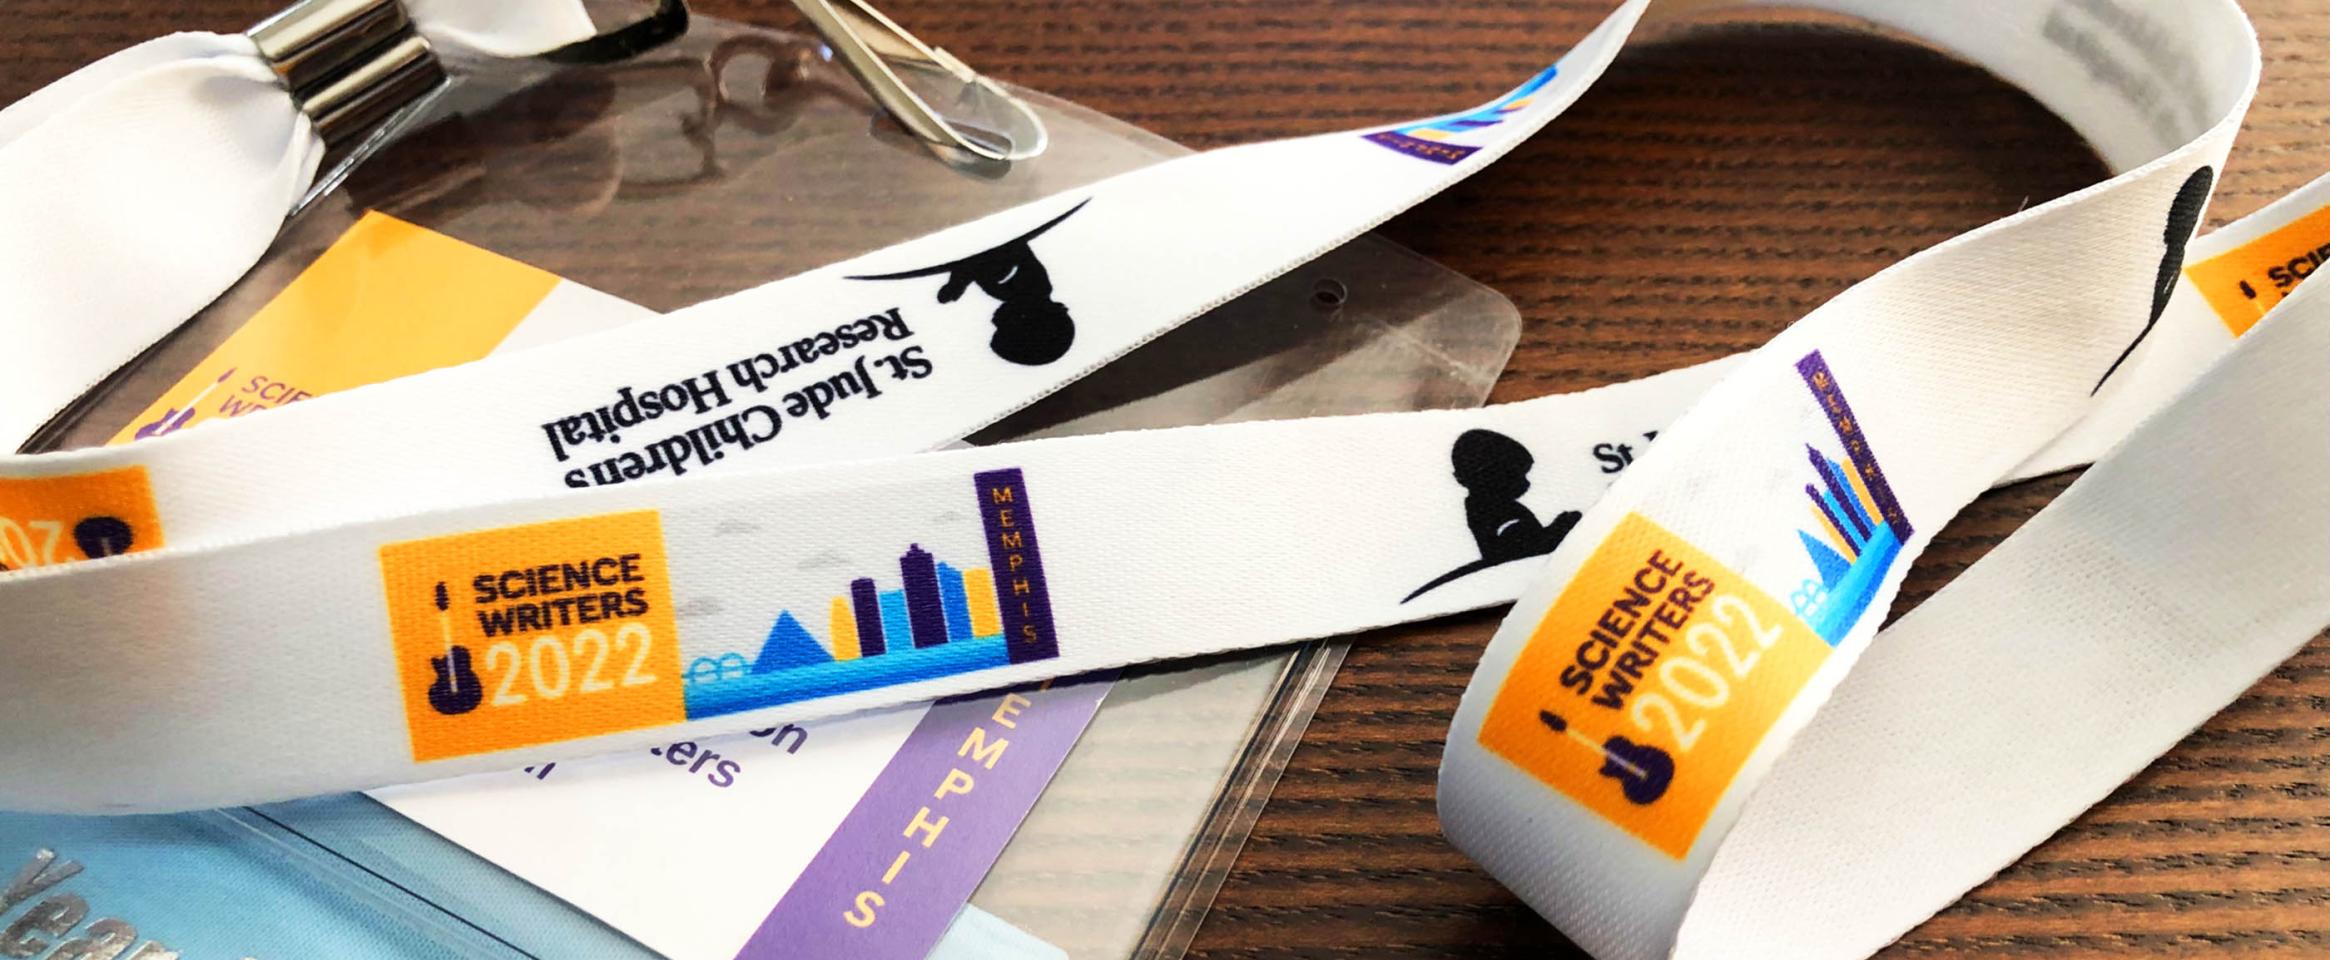 Horizontal photo of a Science Writers 2022 name badge and lanyard draped artistically on a wood-grain table top. The conference logo and St. Jude logo are visible, along with an attendee ribbon attached to the name badge.